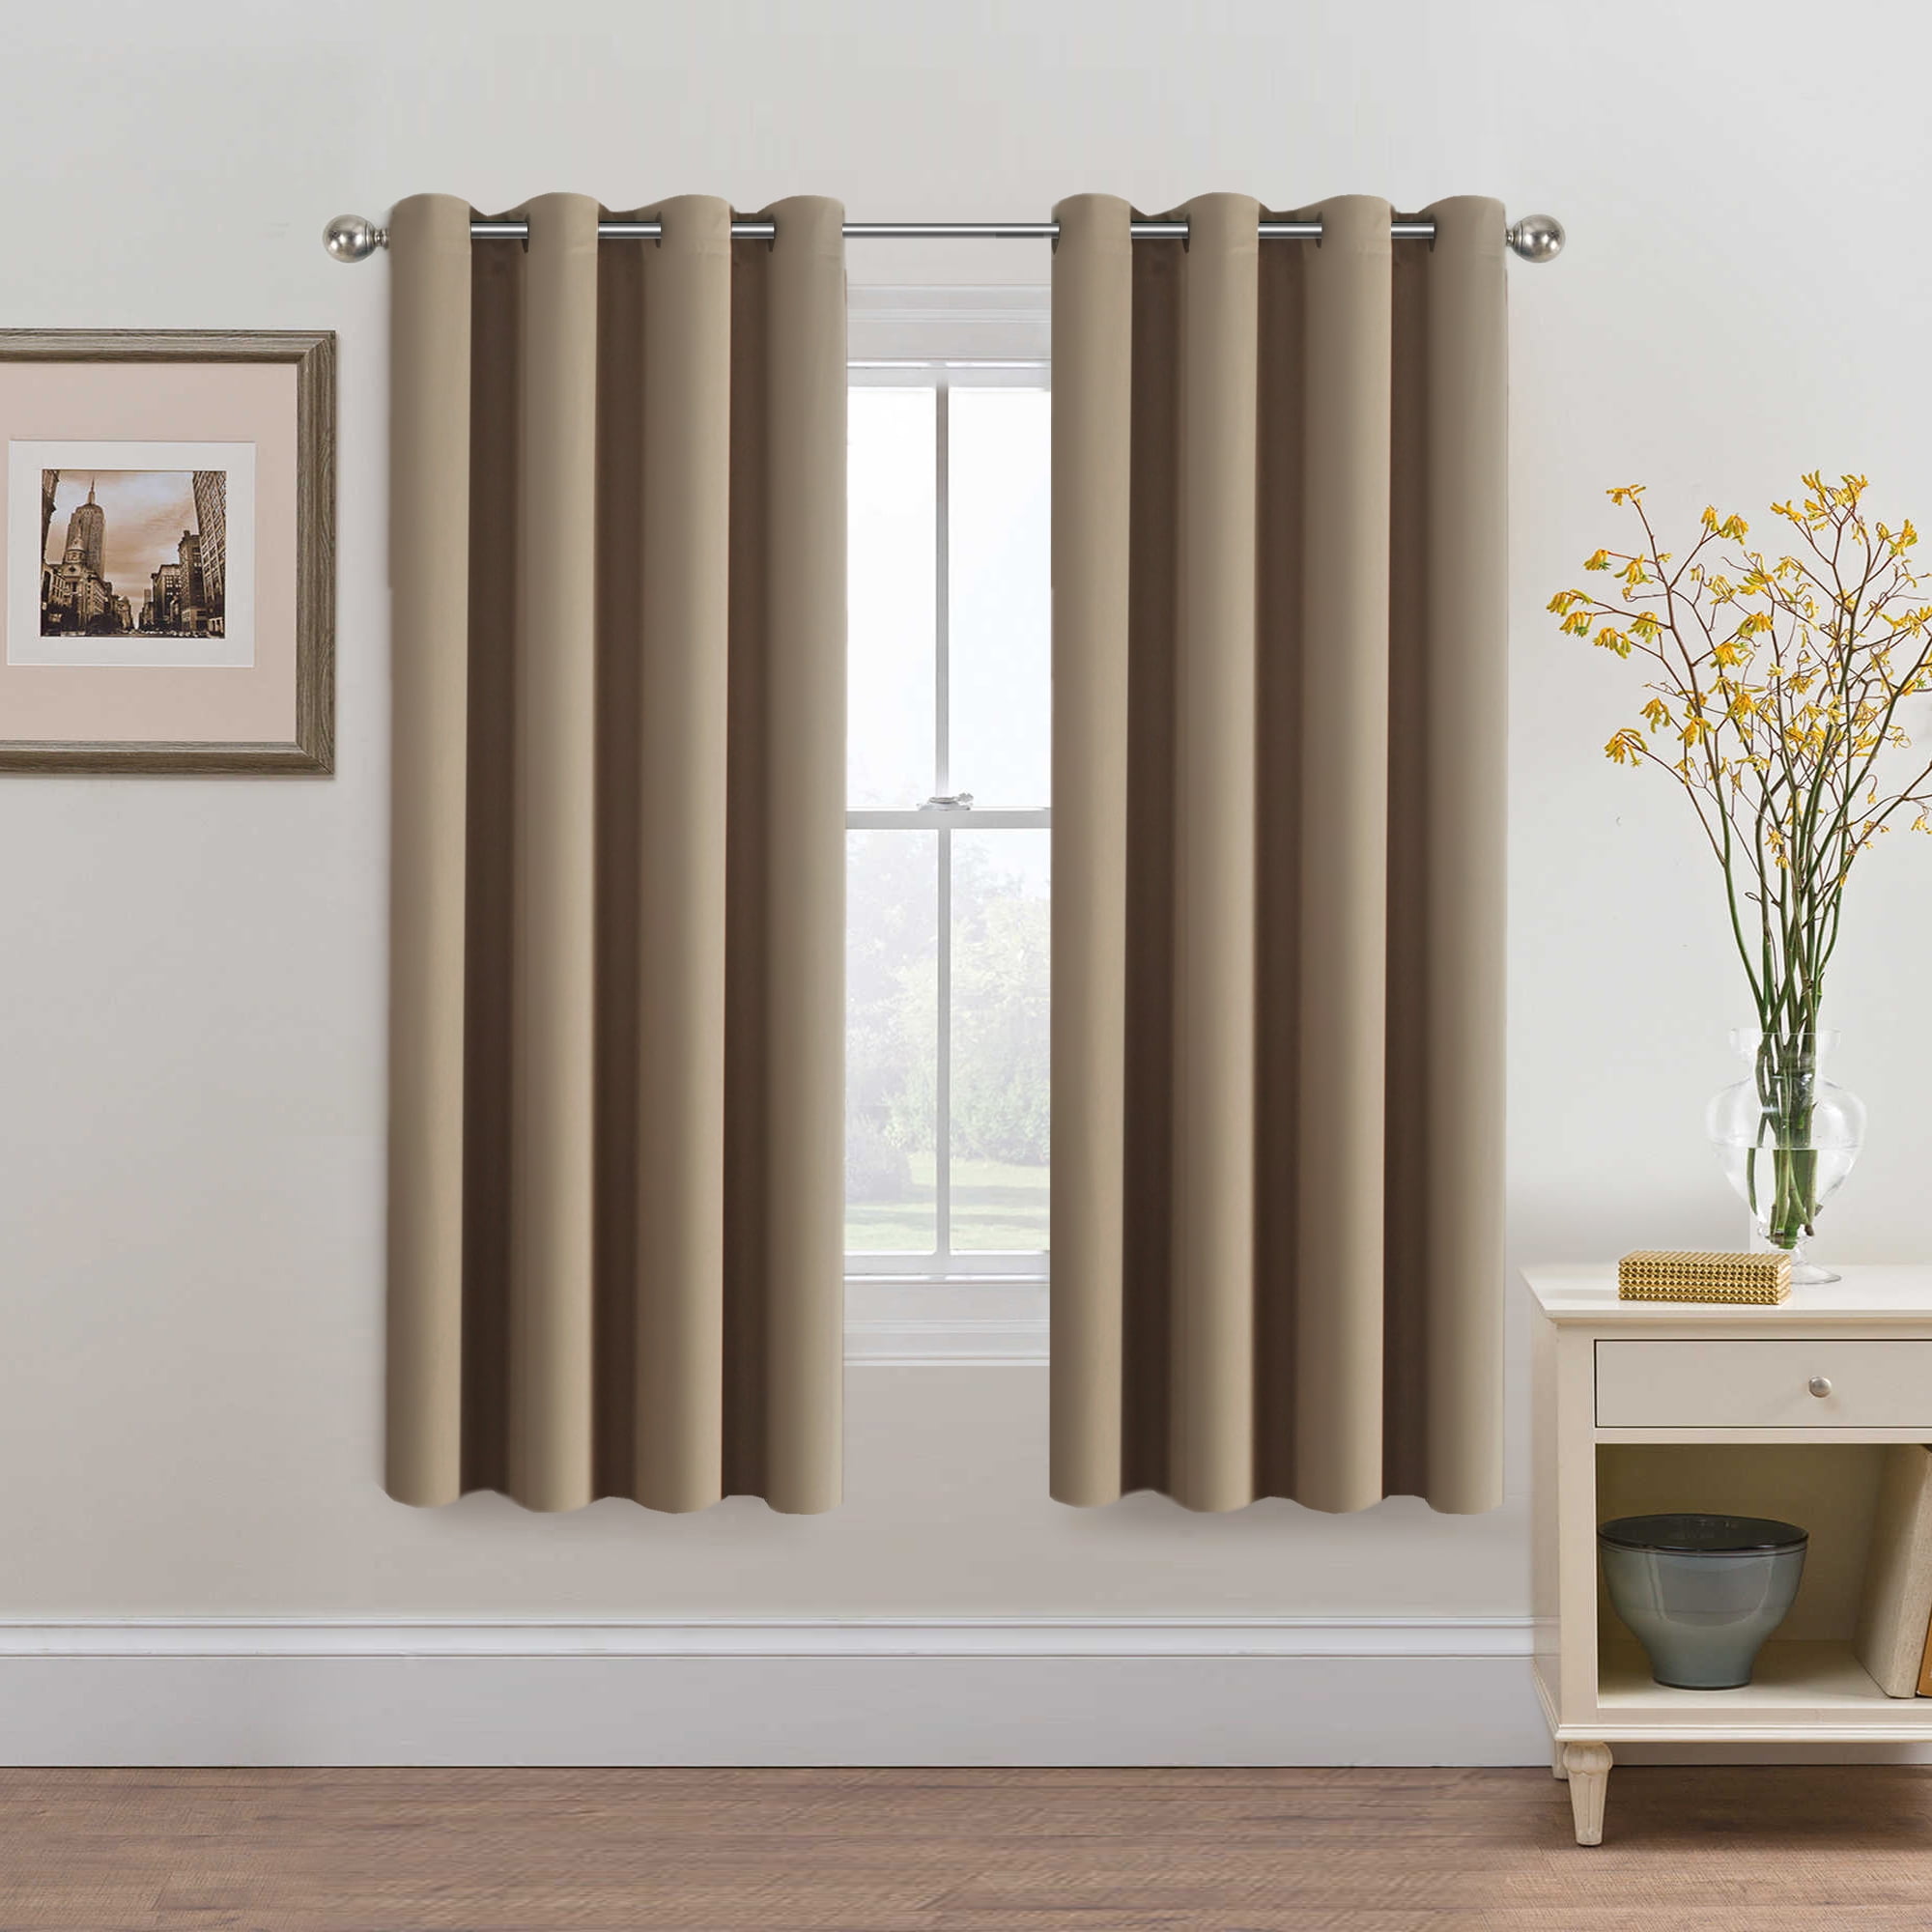 H.VERSAILTEX Blackout Curtains for Living Room/Bedroom Ultra Soft and Smooth The 